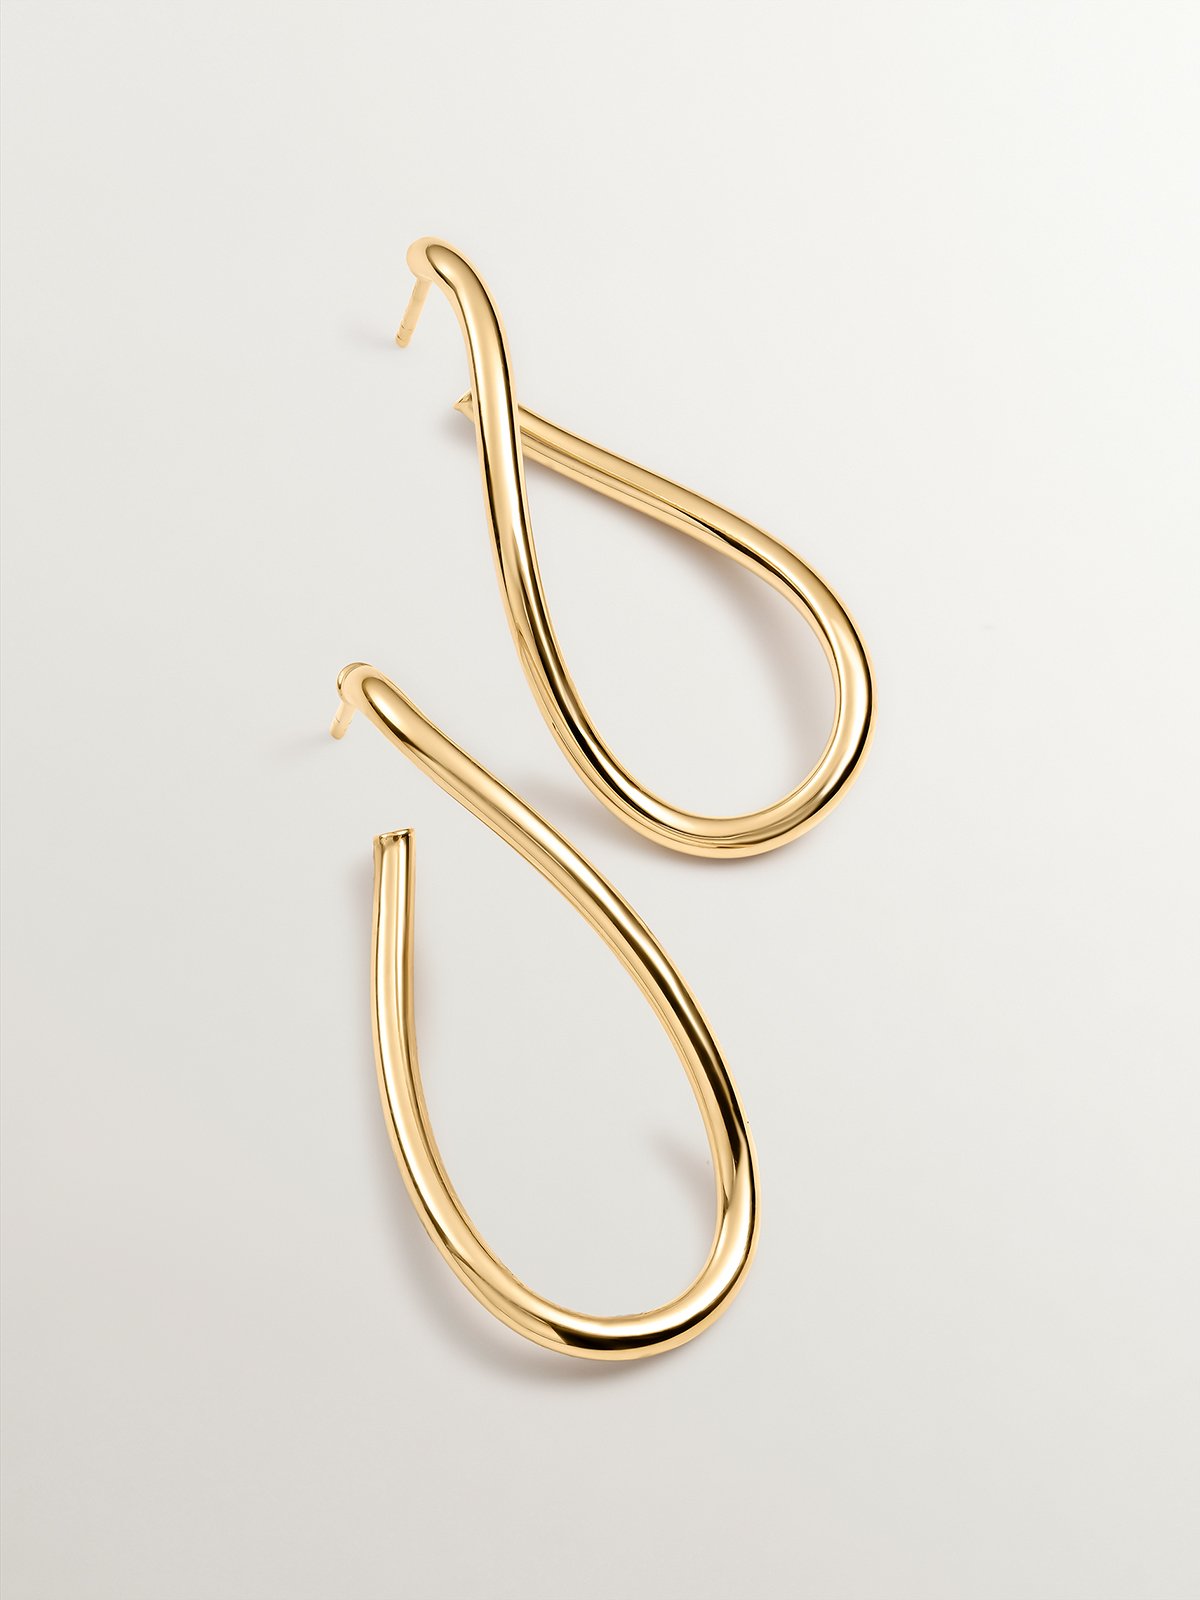 Large wavy hoop earrings made of 925 silver plated in 18K yellow gold